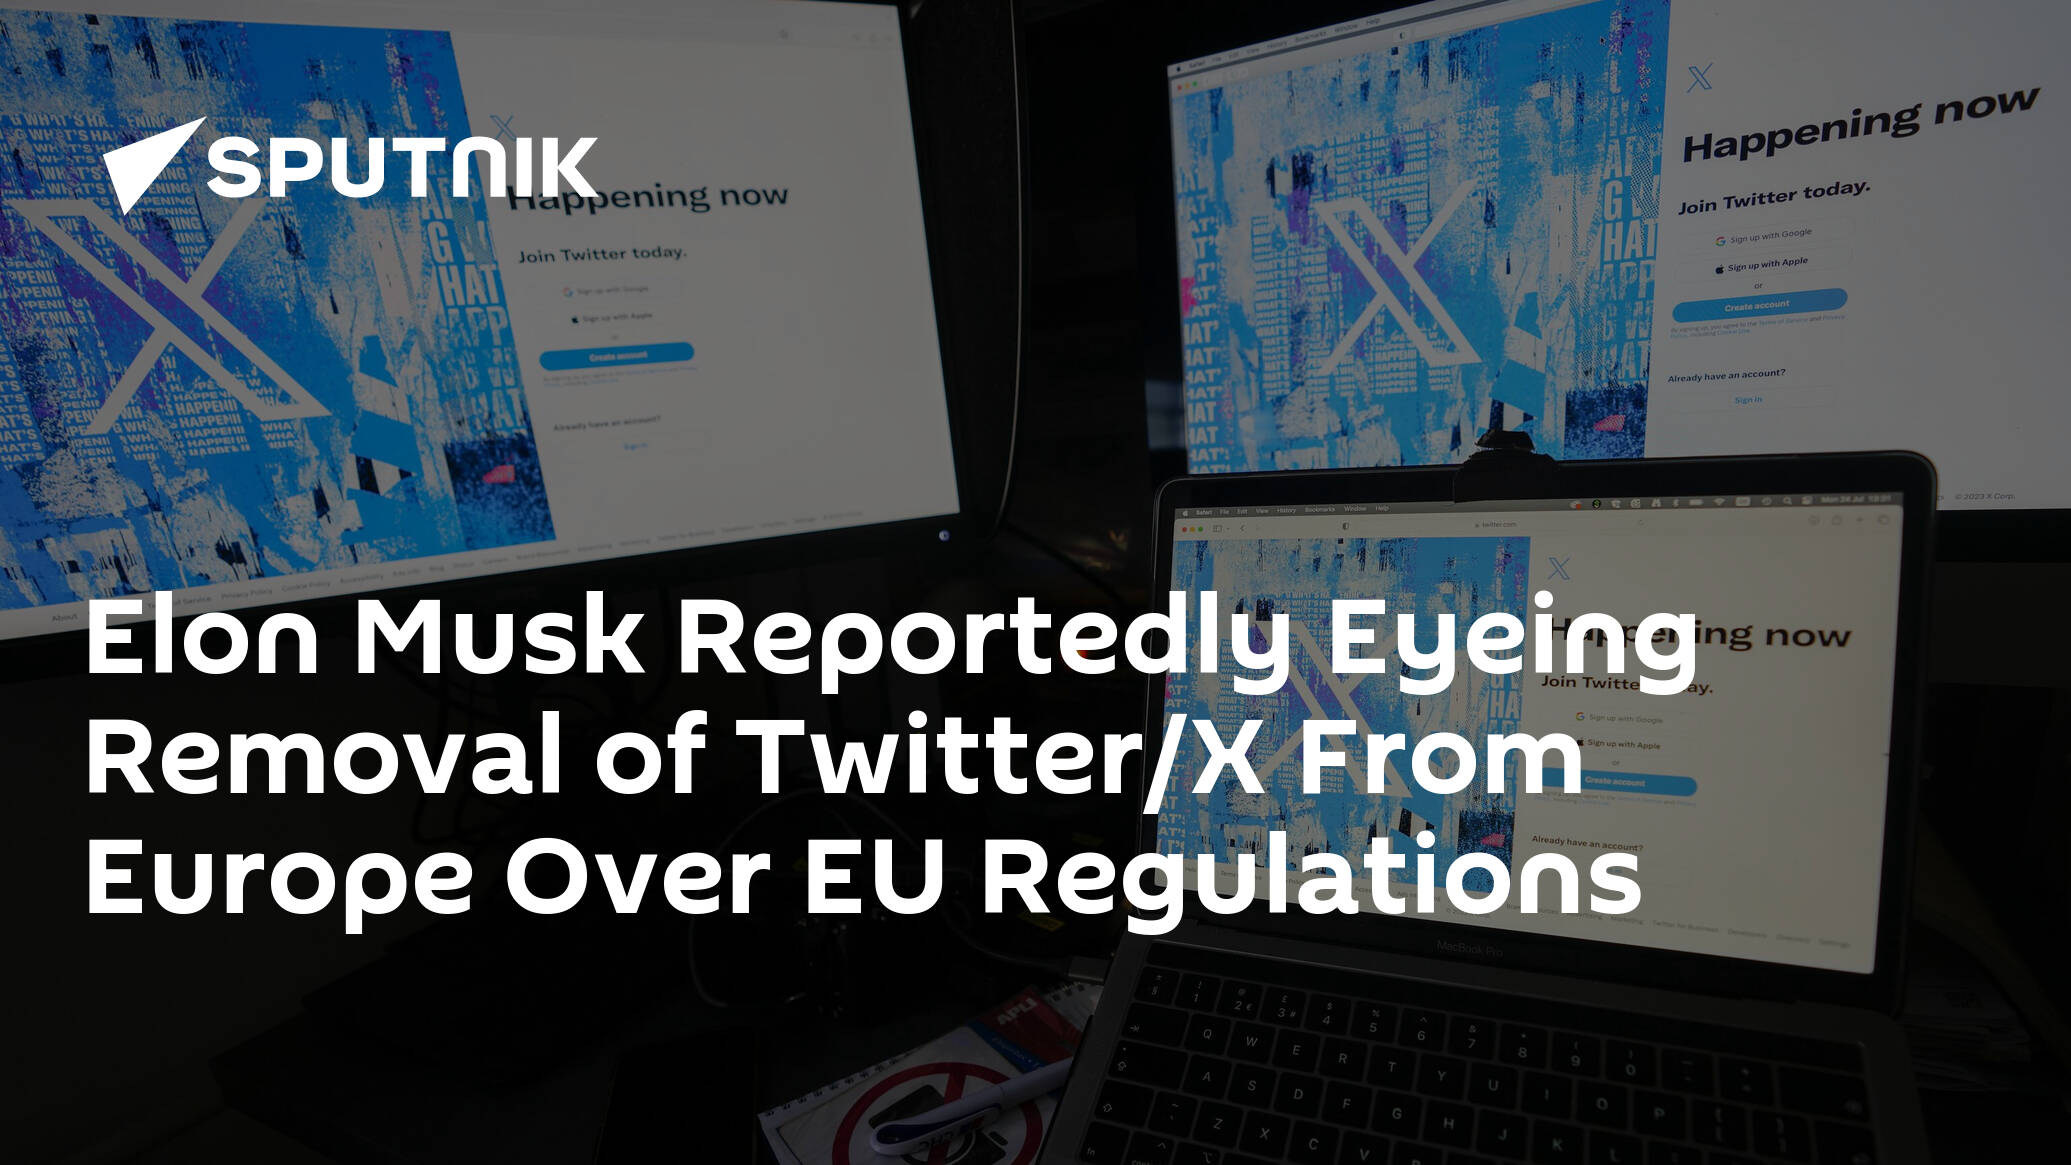 Elon Musk Reportedly Eyeing Removal of Twitter/X From Europe Over EU Regulations